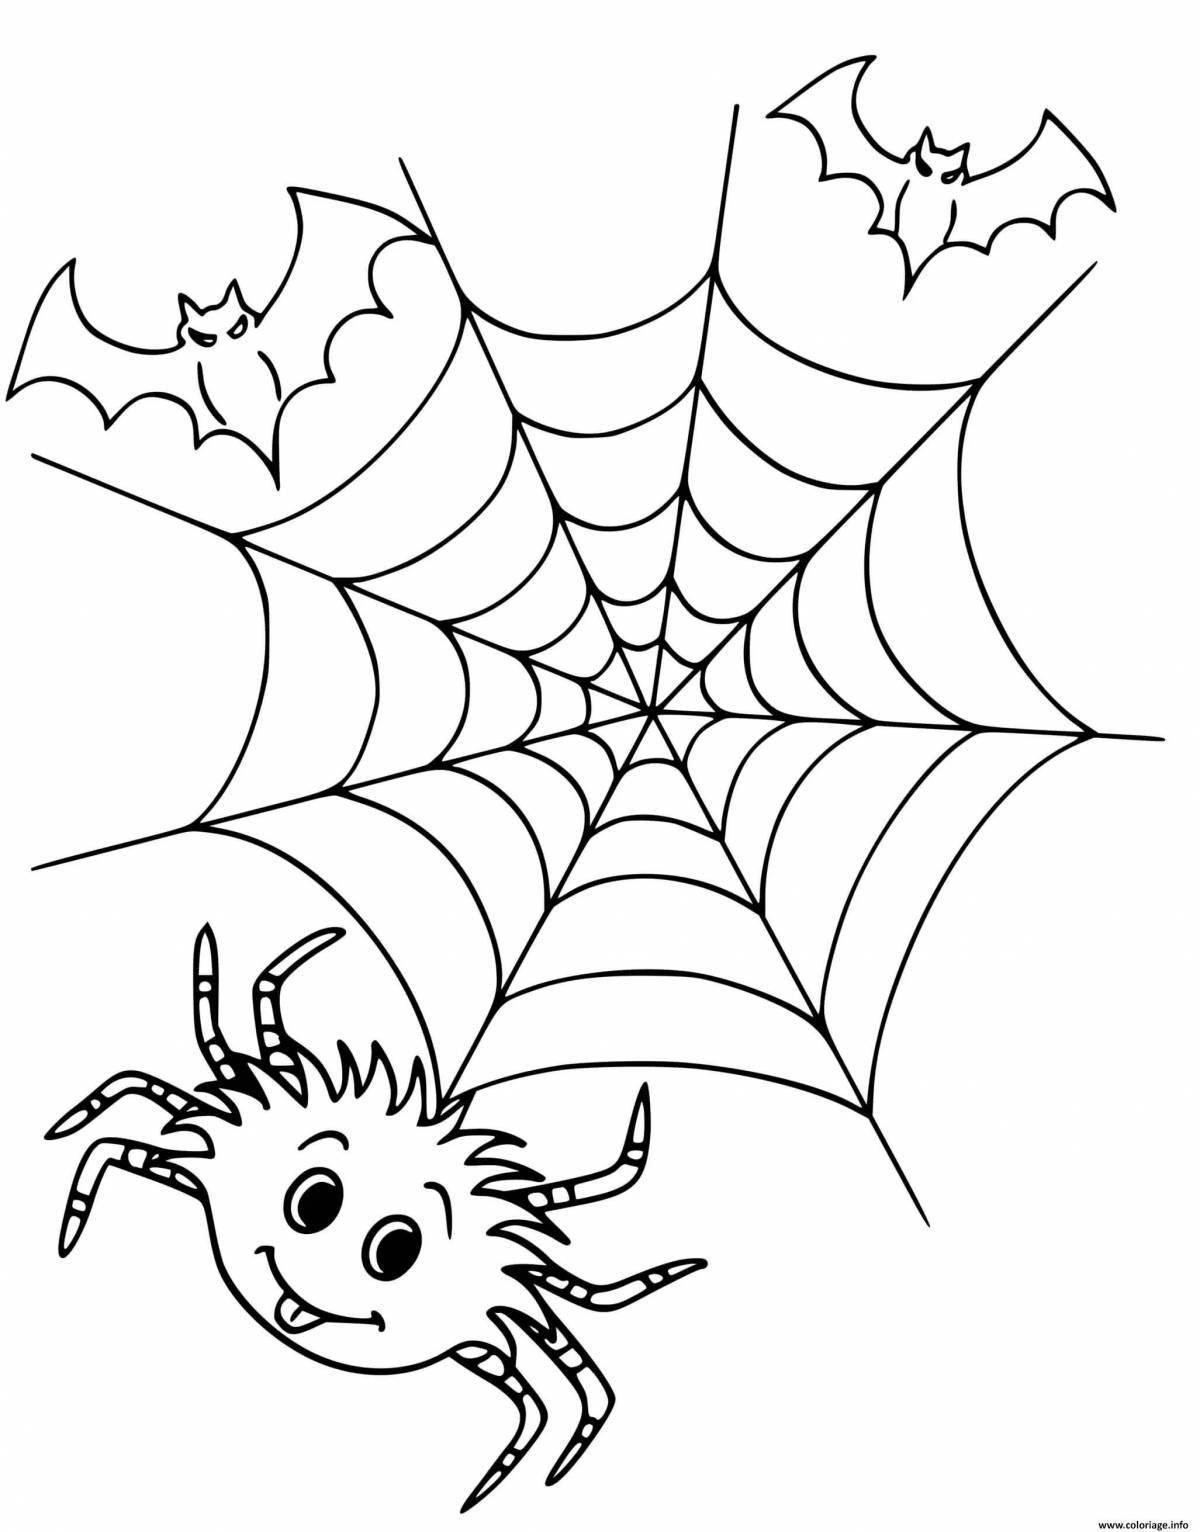 Elegant coloring pages spiders